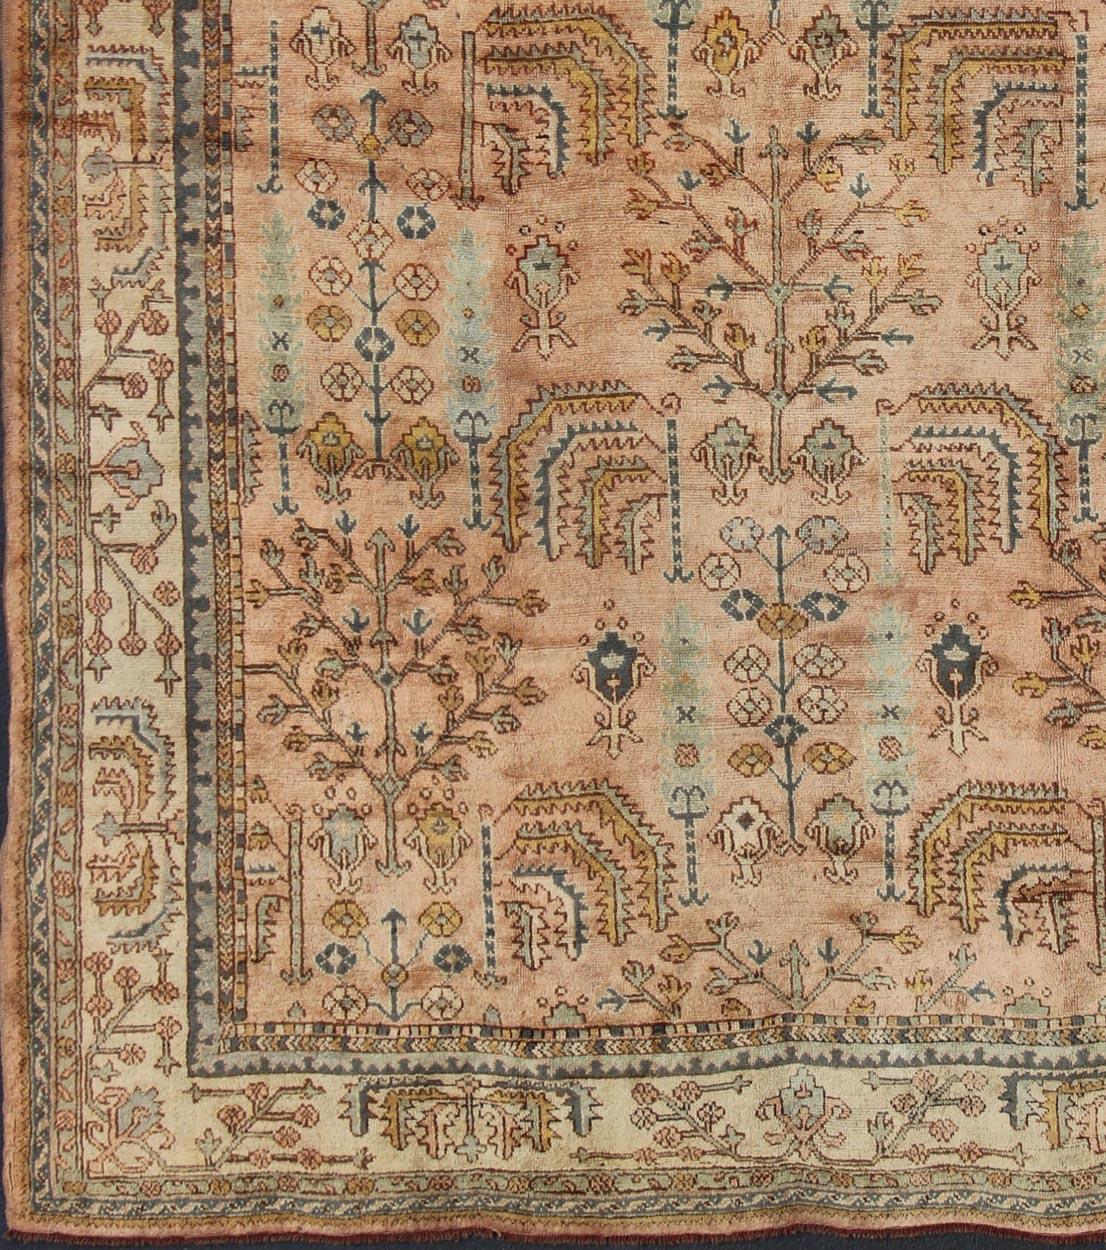 Produced in early 20th century Turkey, this antique Oushak is characterized by a comely and highly representative Oushak composition. Building on traditional designs, this marvelous Turkish rug features an all-over floral design with colors such as